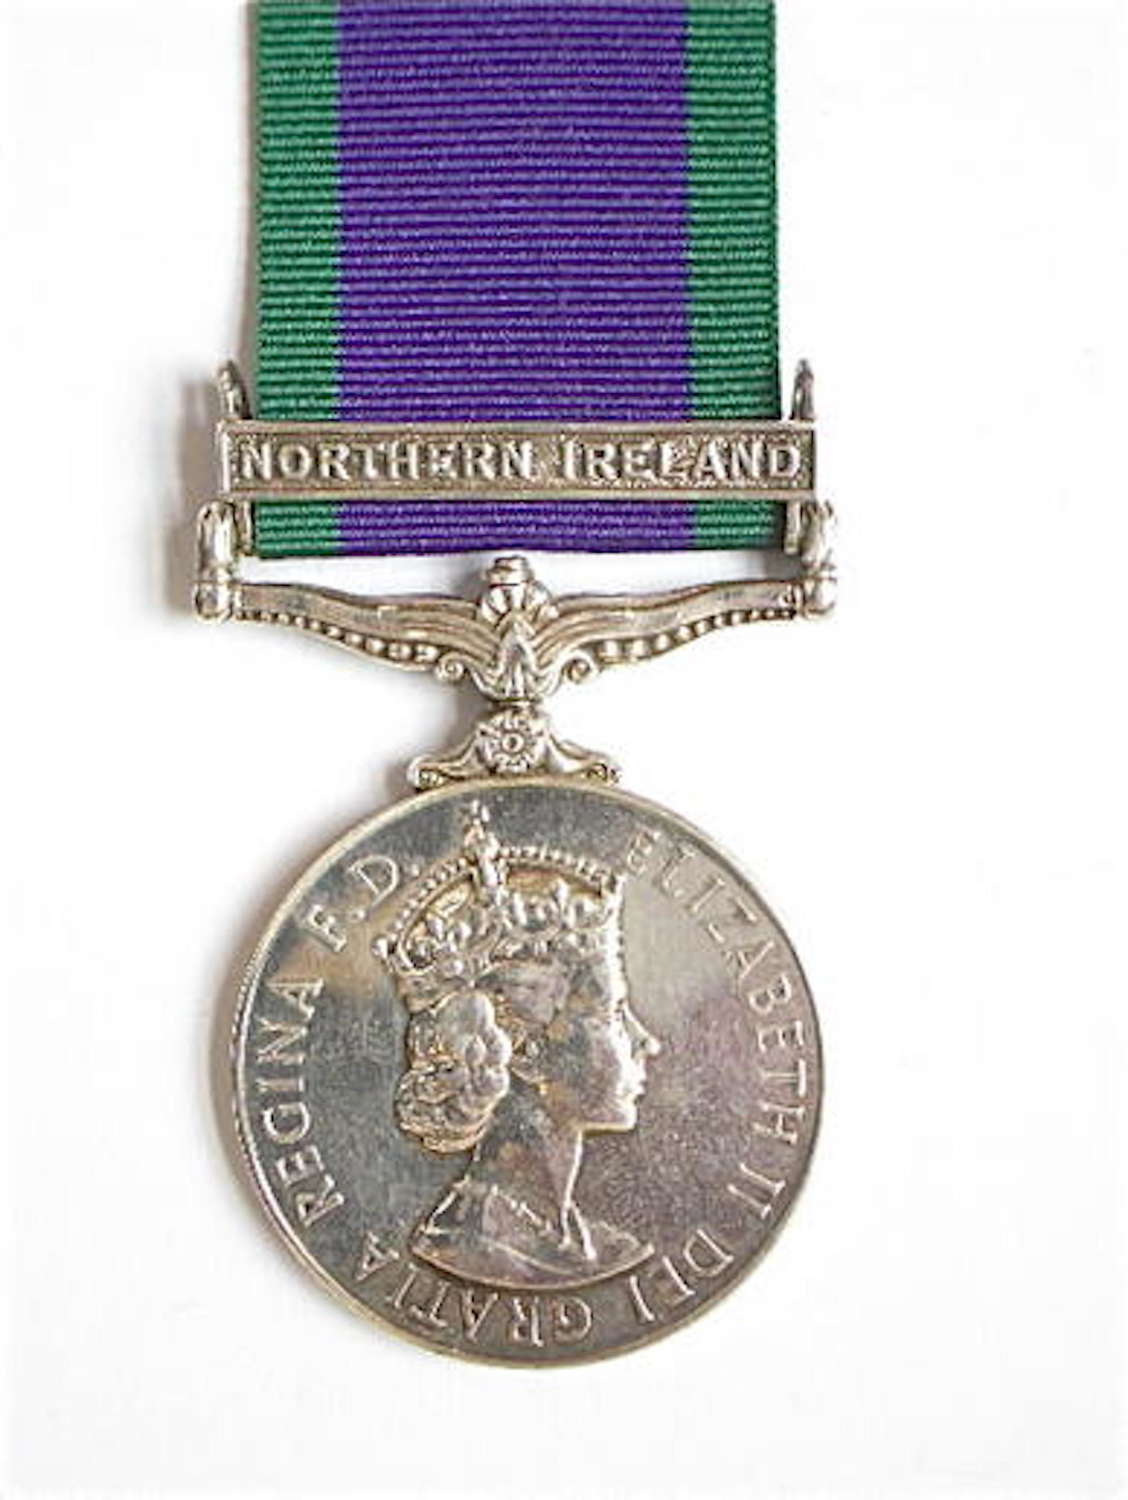 Royal Tank Regiment Campaign Service Medal, clasp “Northern Ireland